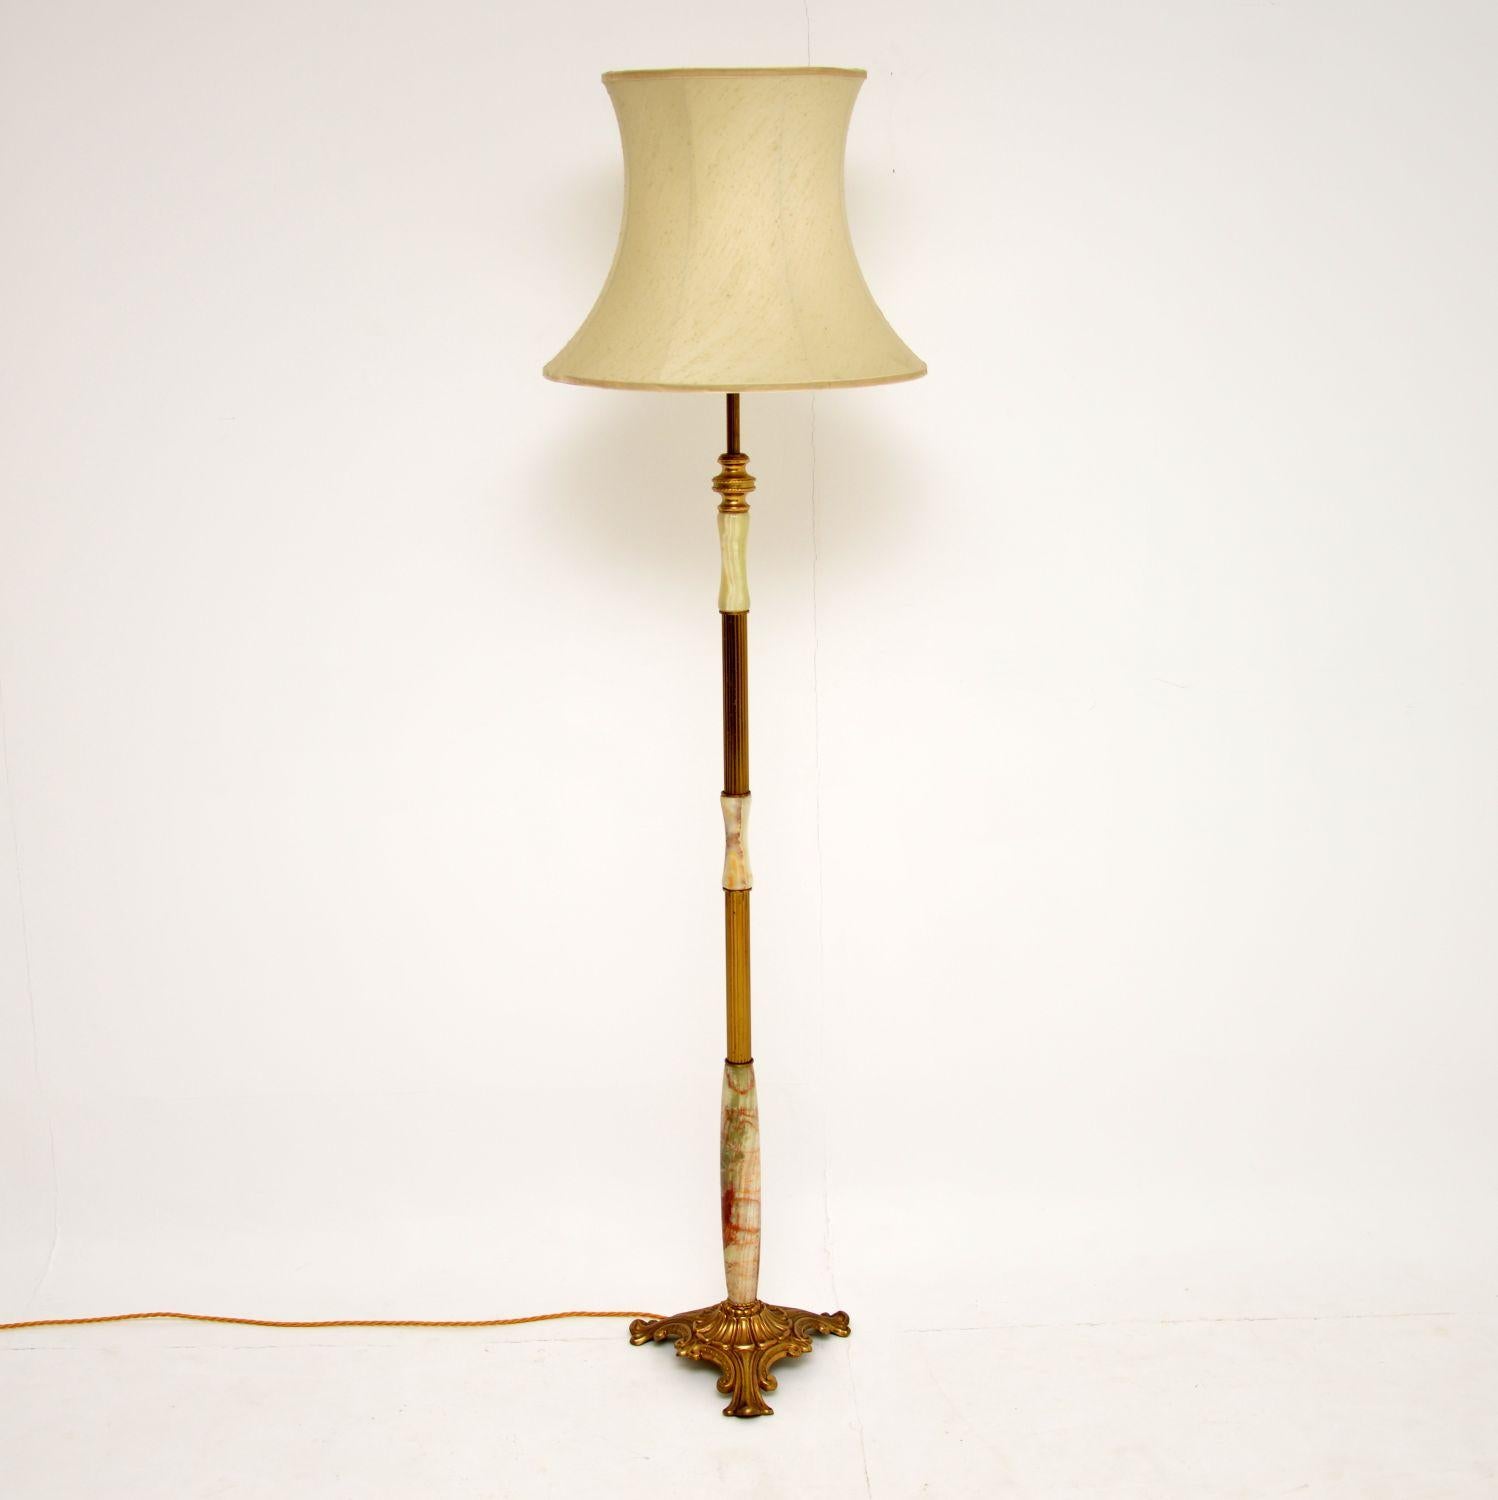 A beautiful, high quality antique floor lamp, this dates from circa 1930s-1950s. The stand is made from a lovely combination of onyx and brass, the base has a beautifully intricate pattern.

The condition is great, there is no damage and hardly